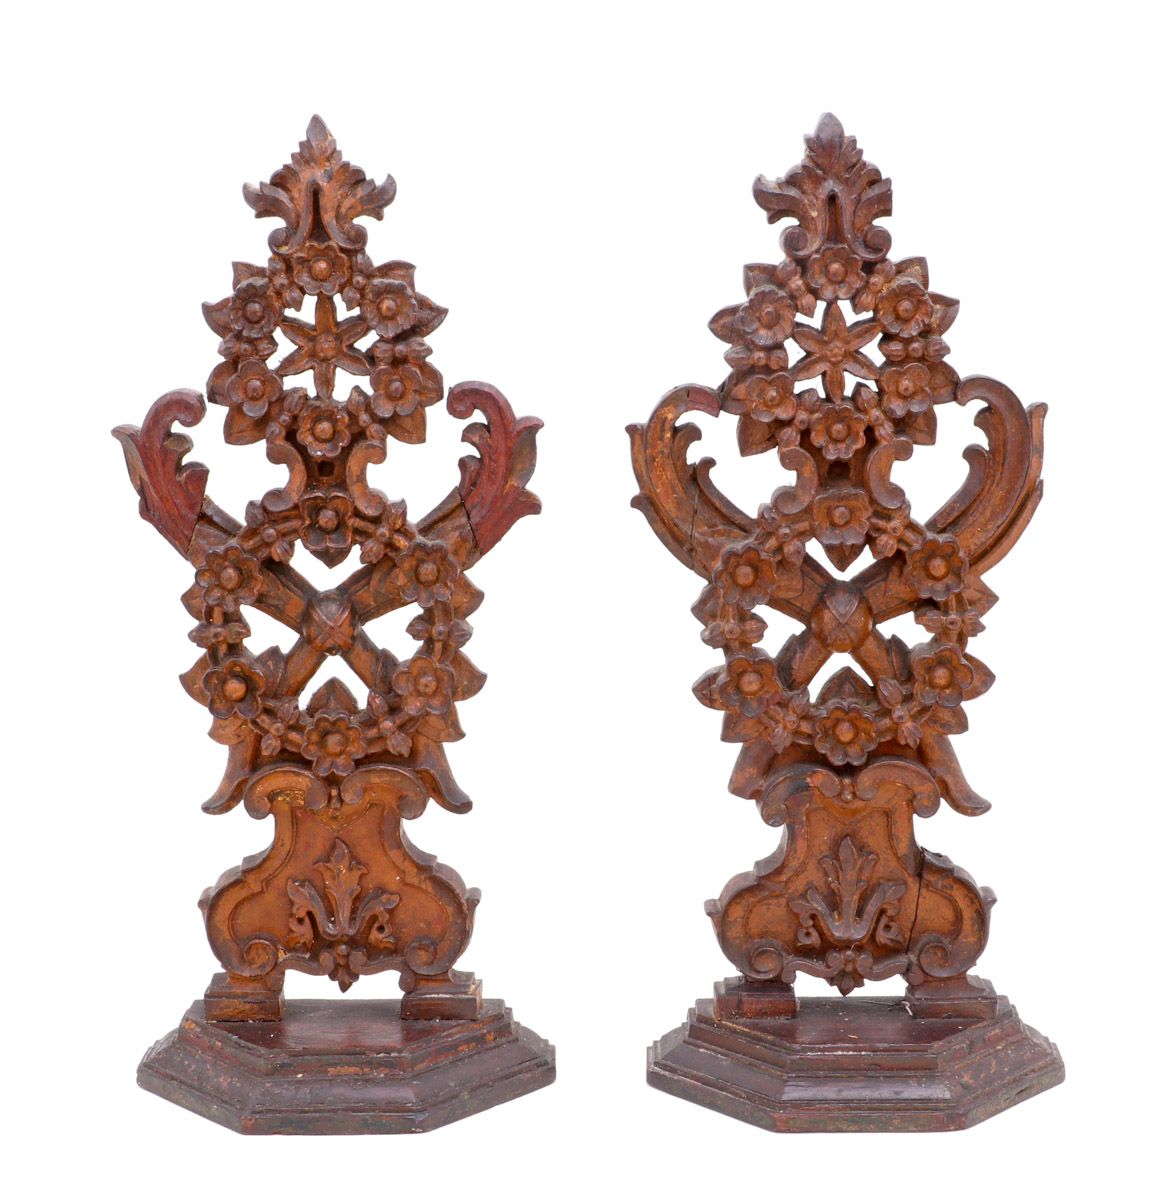 A PAIR OF FLOWER BOUQUETS A PAIR OF FLOWER BOUQUETS Carved and painted wood, flo&hellip;